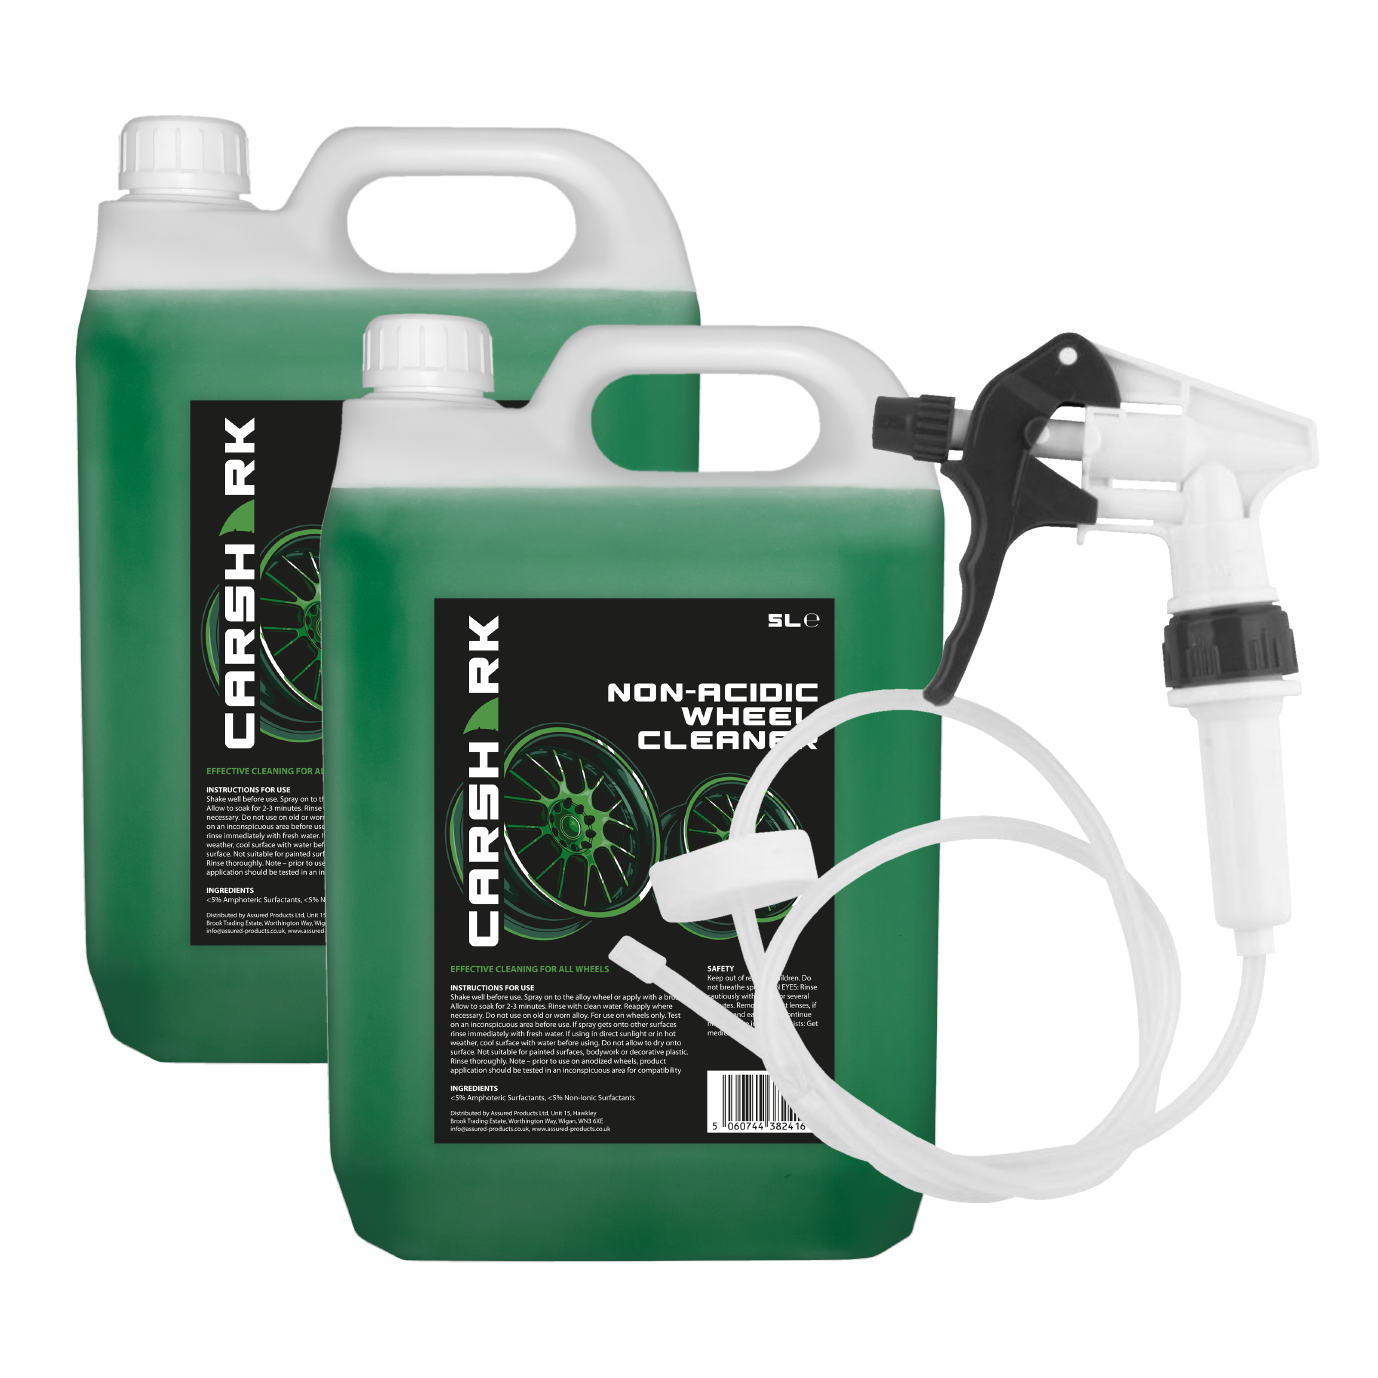 CARSHARK Non-Acidic Wheel Cleaner 2 x 5L (with Long Hose Trigger)